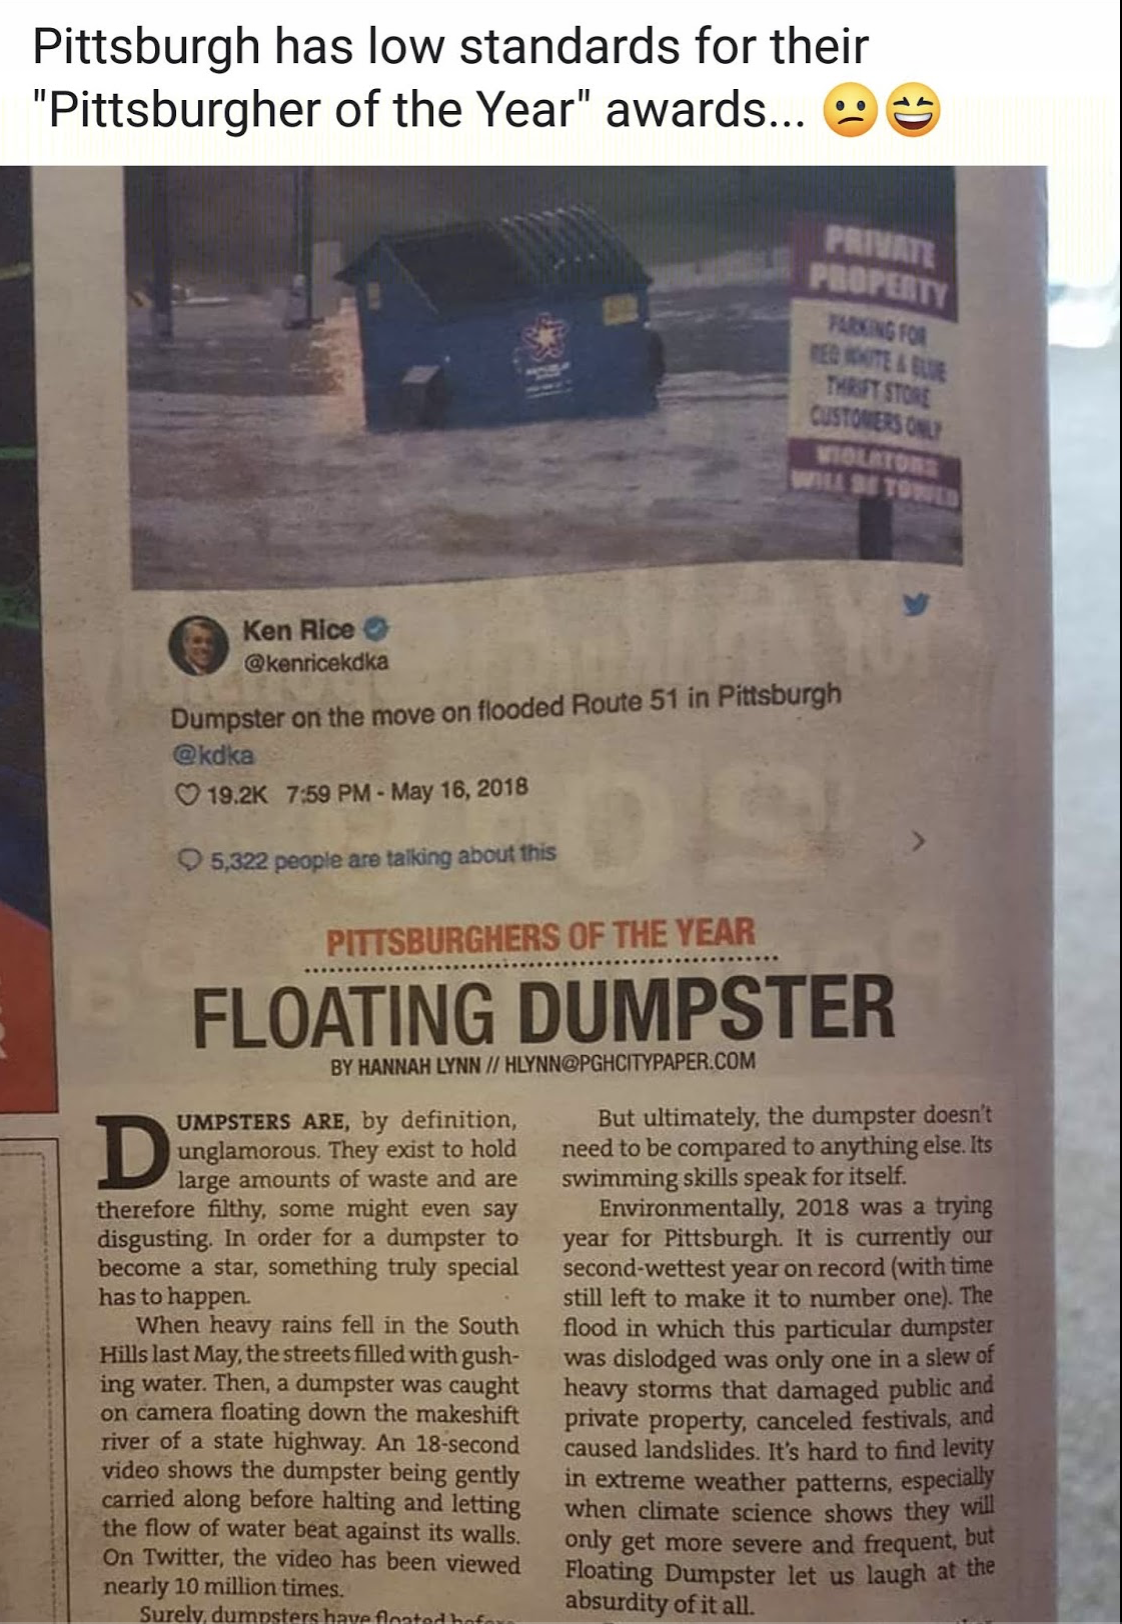 newspaper - Pittsburgh has low standards for their "Pittsburgher of the Year" awards... Operti Kon Rice enida Dumpster on the move on tooded Route 51 in Pitsburgh les 19.2% Stay 18, 2018 Pittsburghers Of The Year Floating Dumpster By Hannah Liano Moccityp